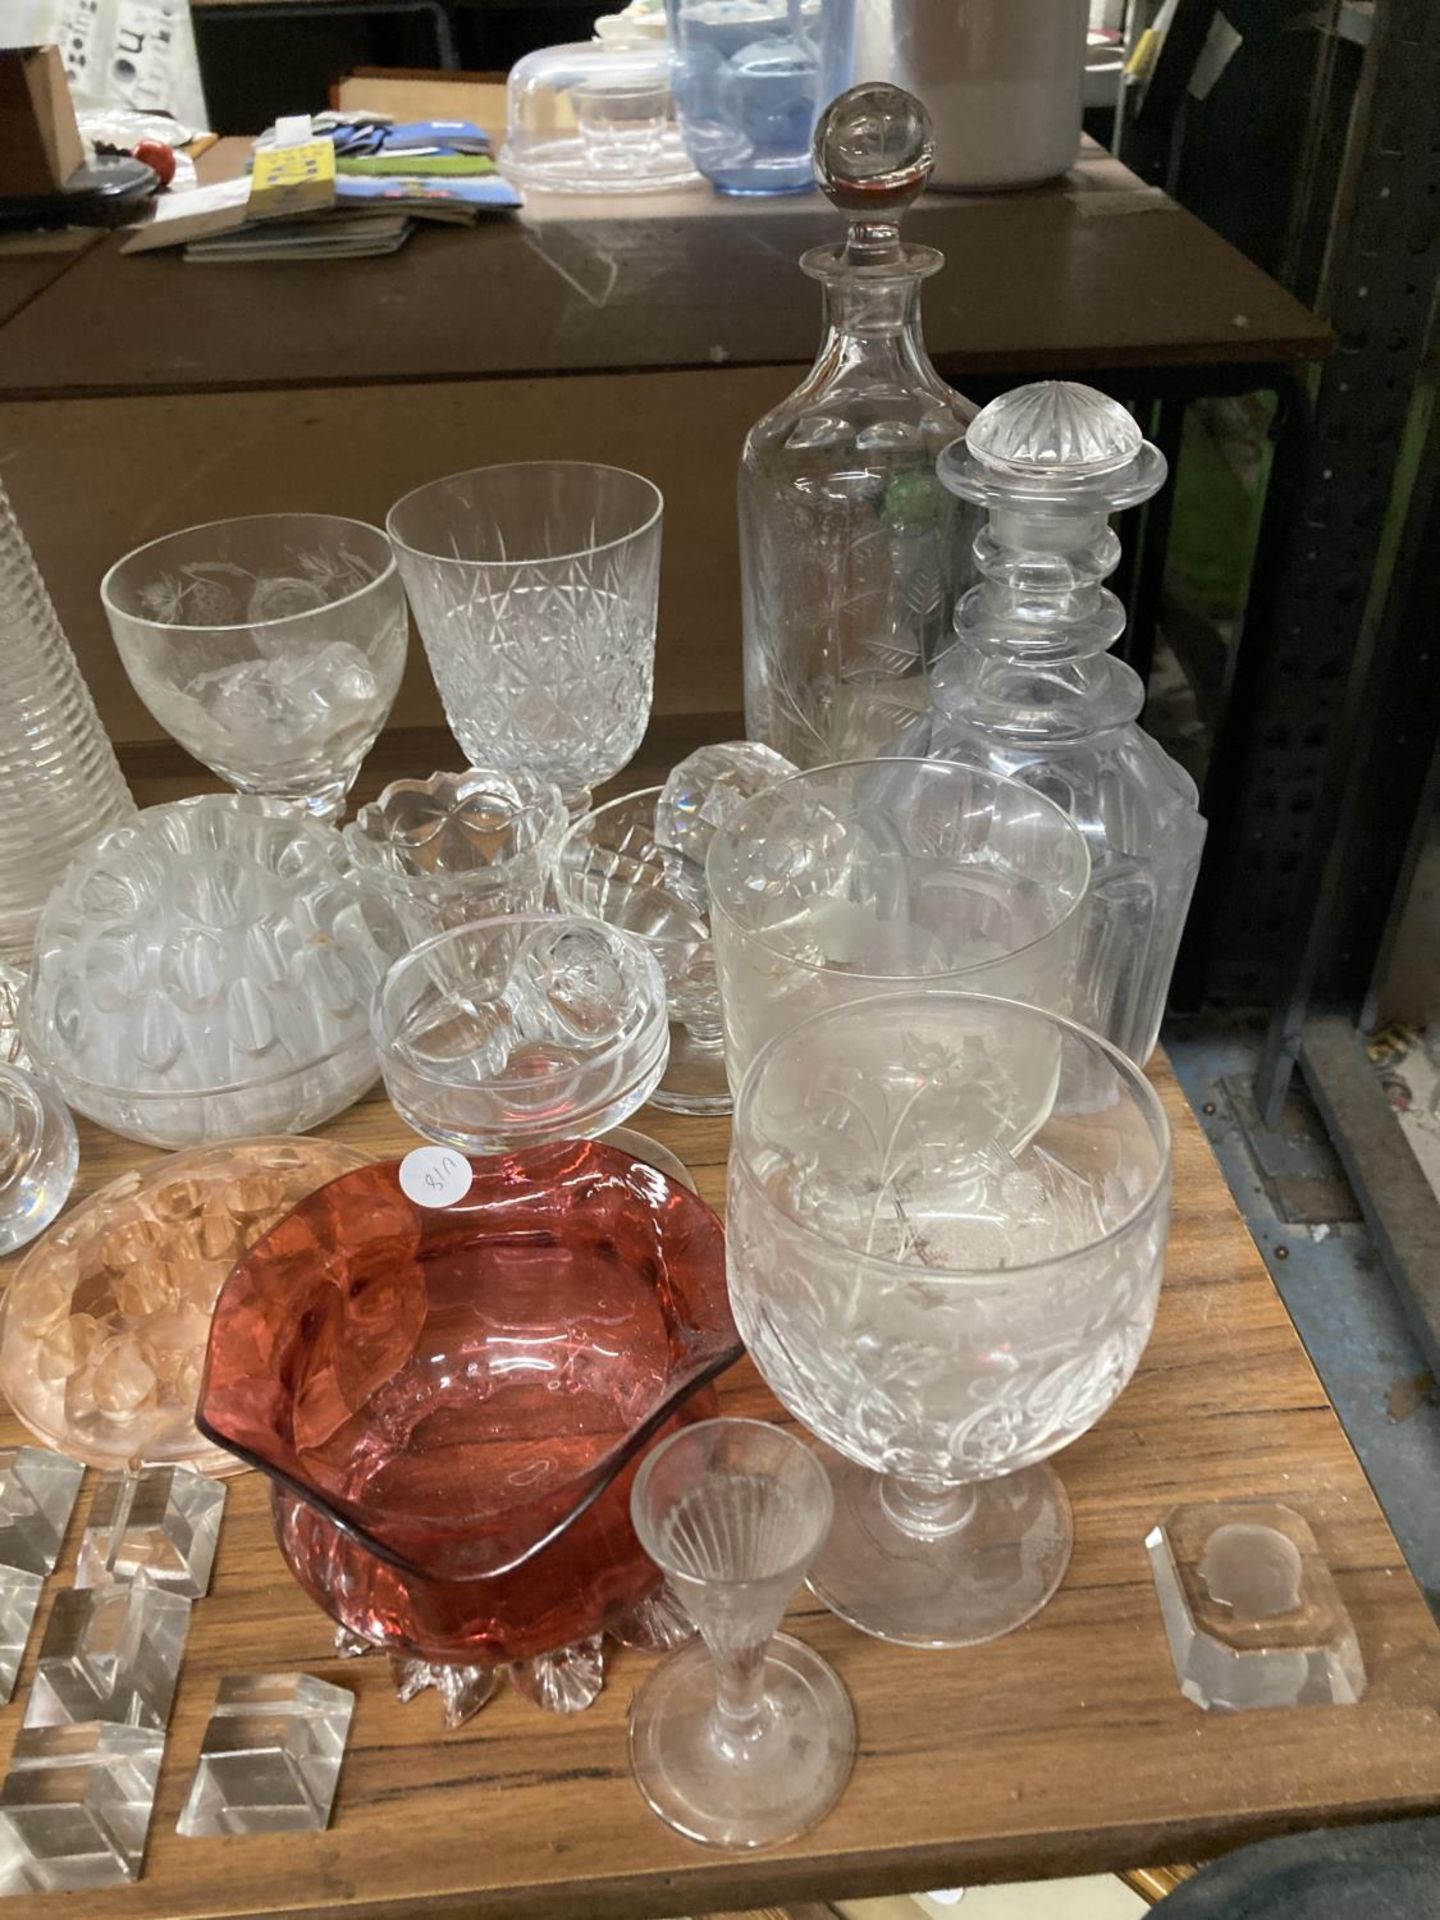 A LARGE QUANTITY OF GLASSWARE TO INCLUDE DECANTERS, NAMECARD HOLDERS, CRANBERRY FOOTED BOWL, - Image 2 of 3